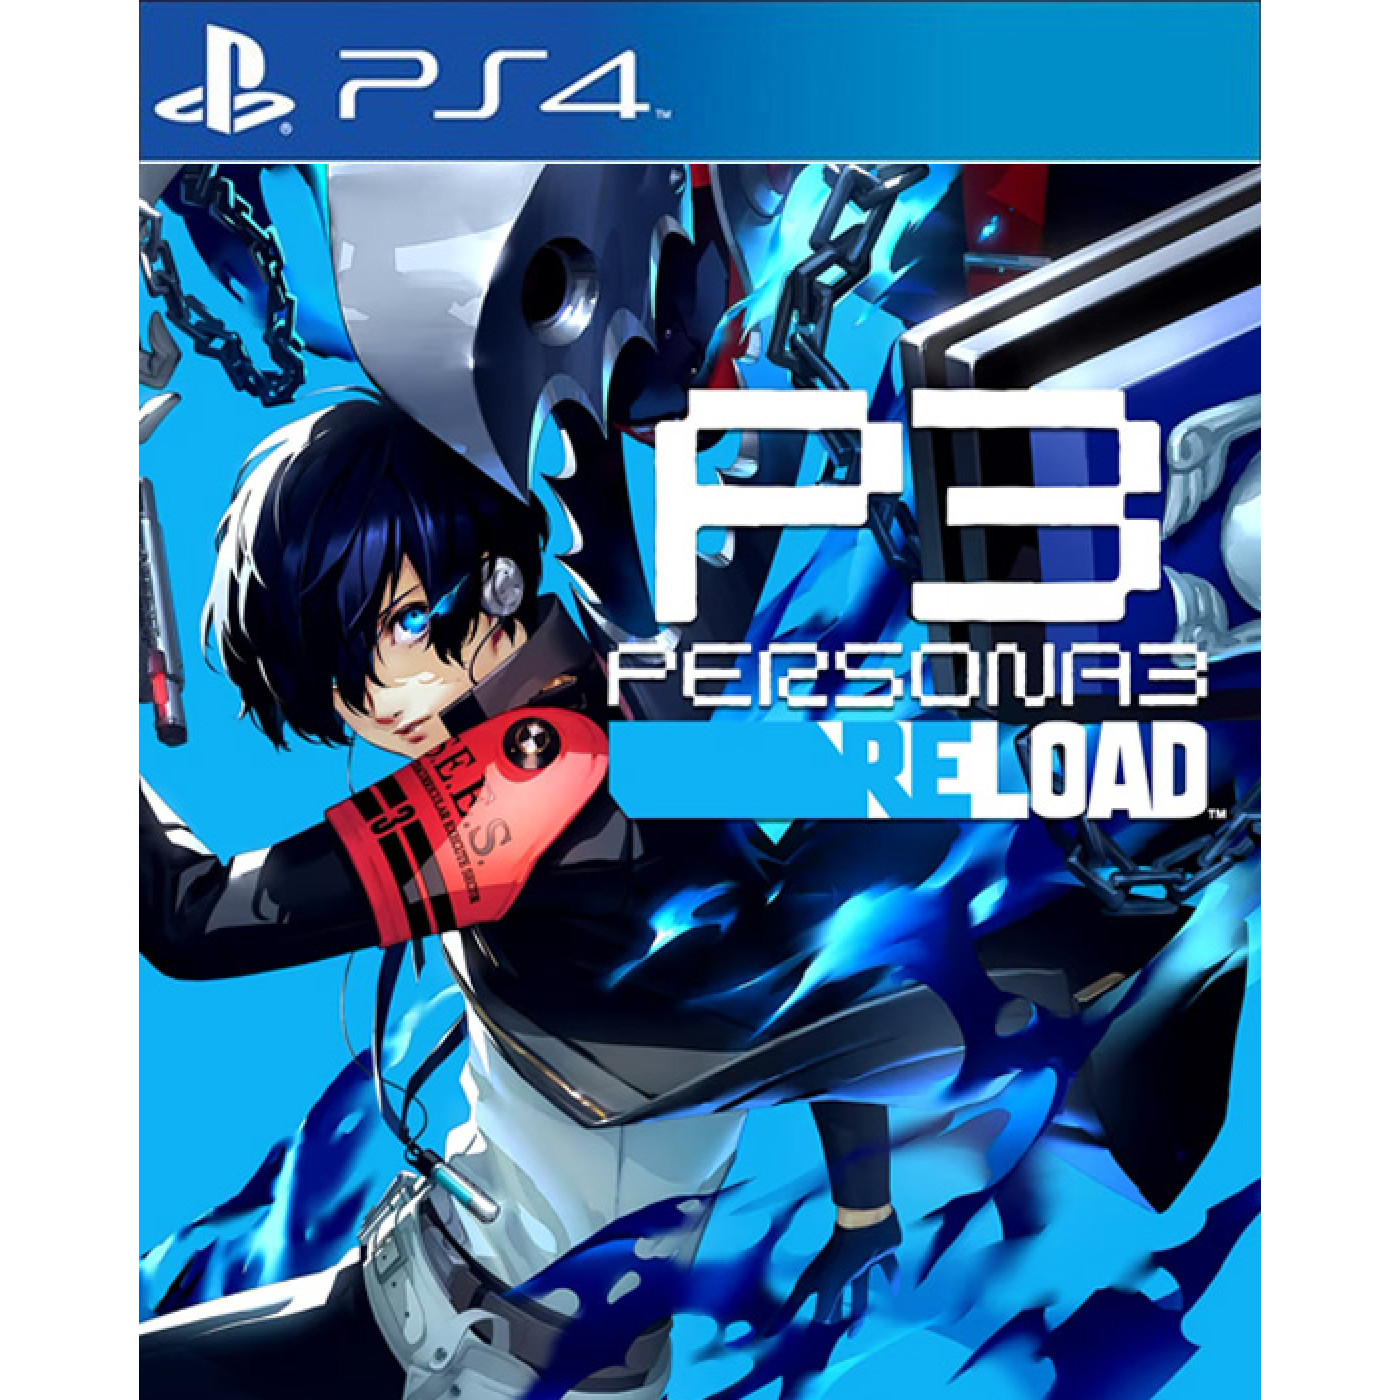 Persona 3 Reload | Game PS4 Giá Rẻ Tại HALO Shop